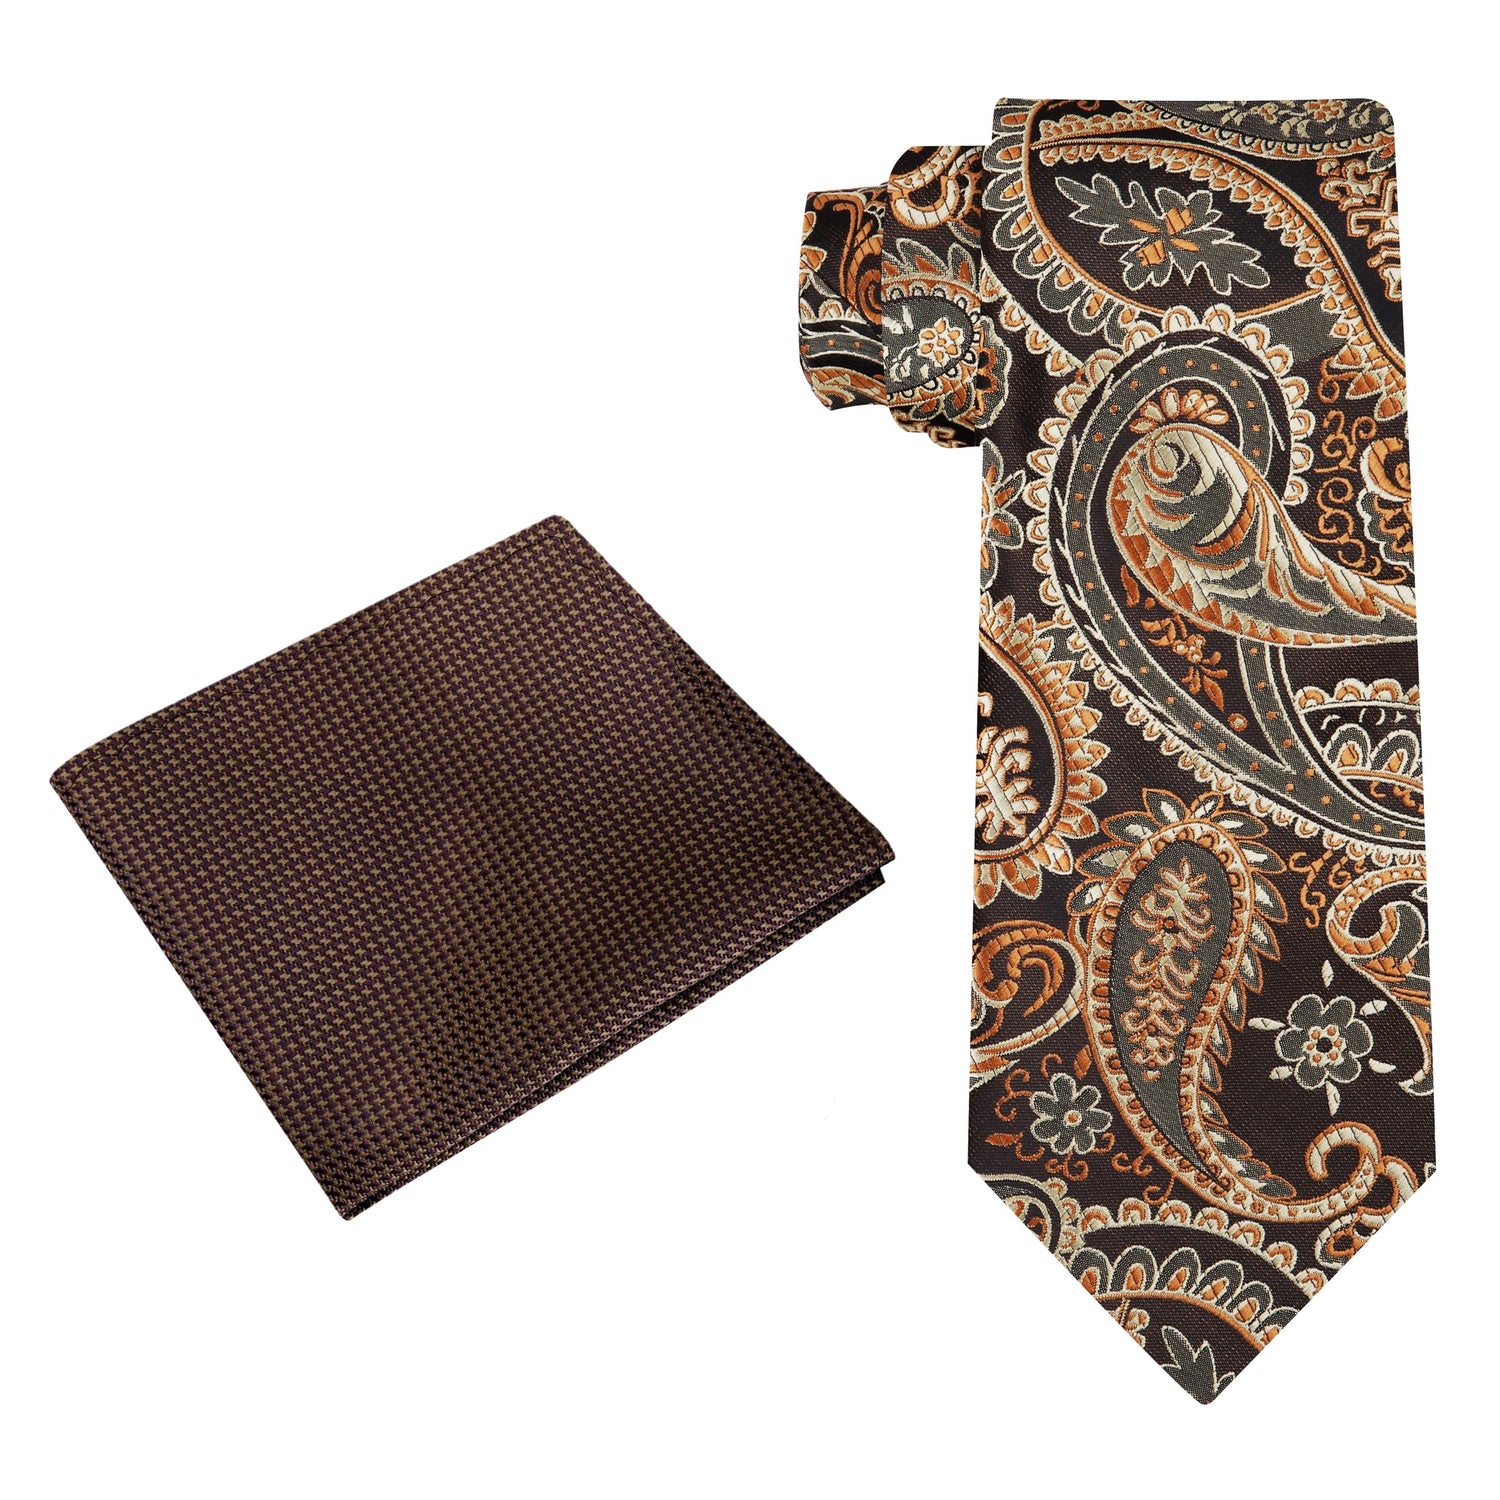 View 2: Shades of Brown Paisley Tie and Brown Houndstooth Pocket Square